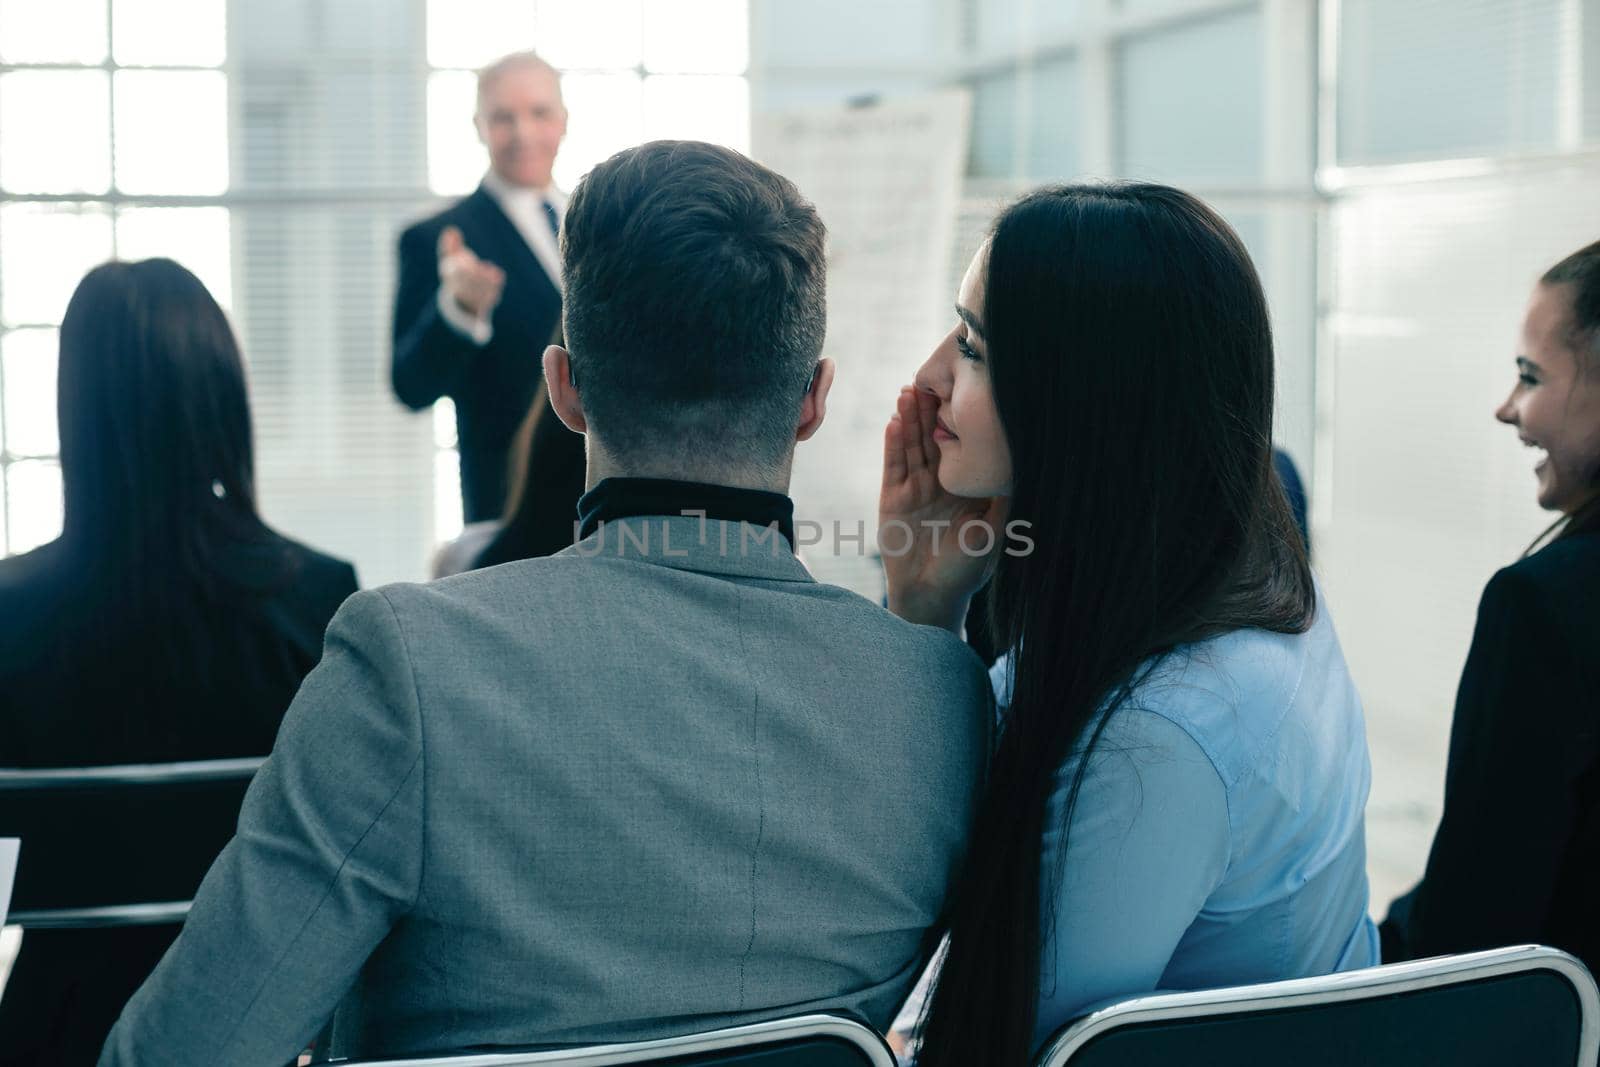 colleagues discuss something during a business presentation by SmartPhotoLab